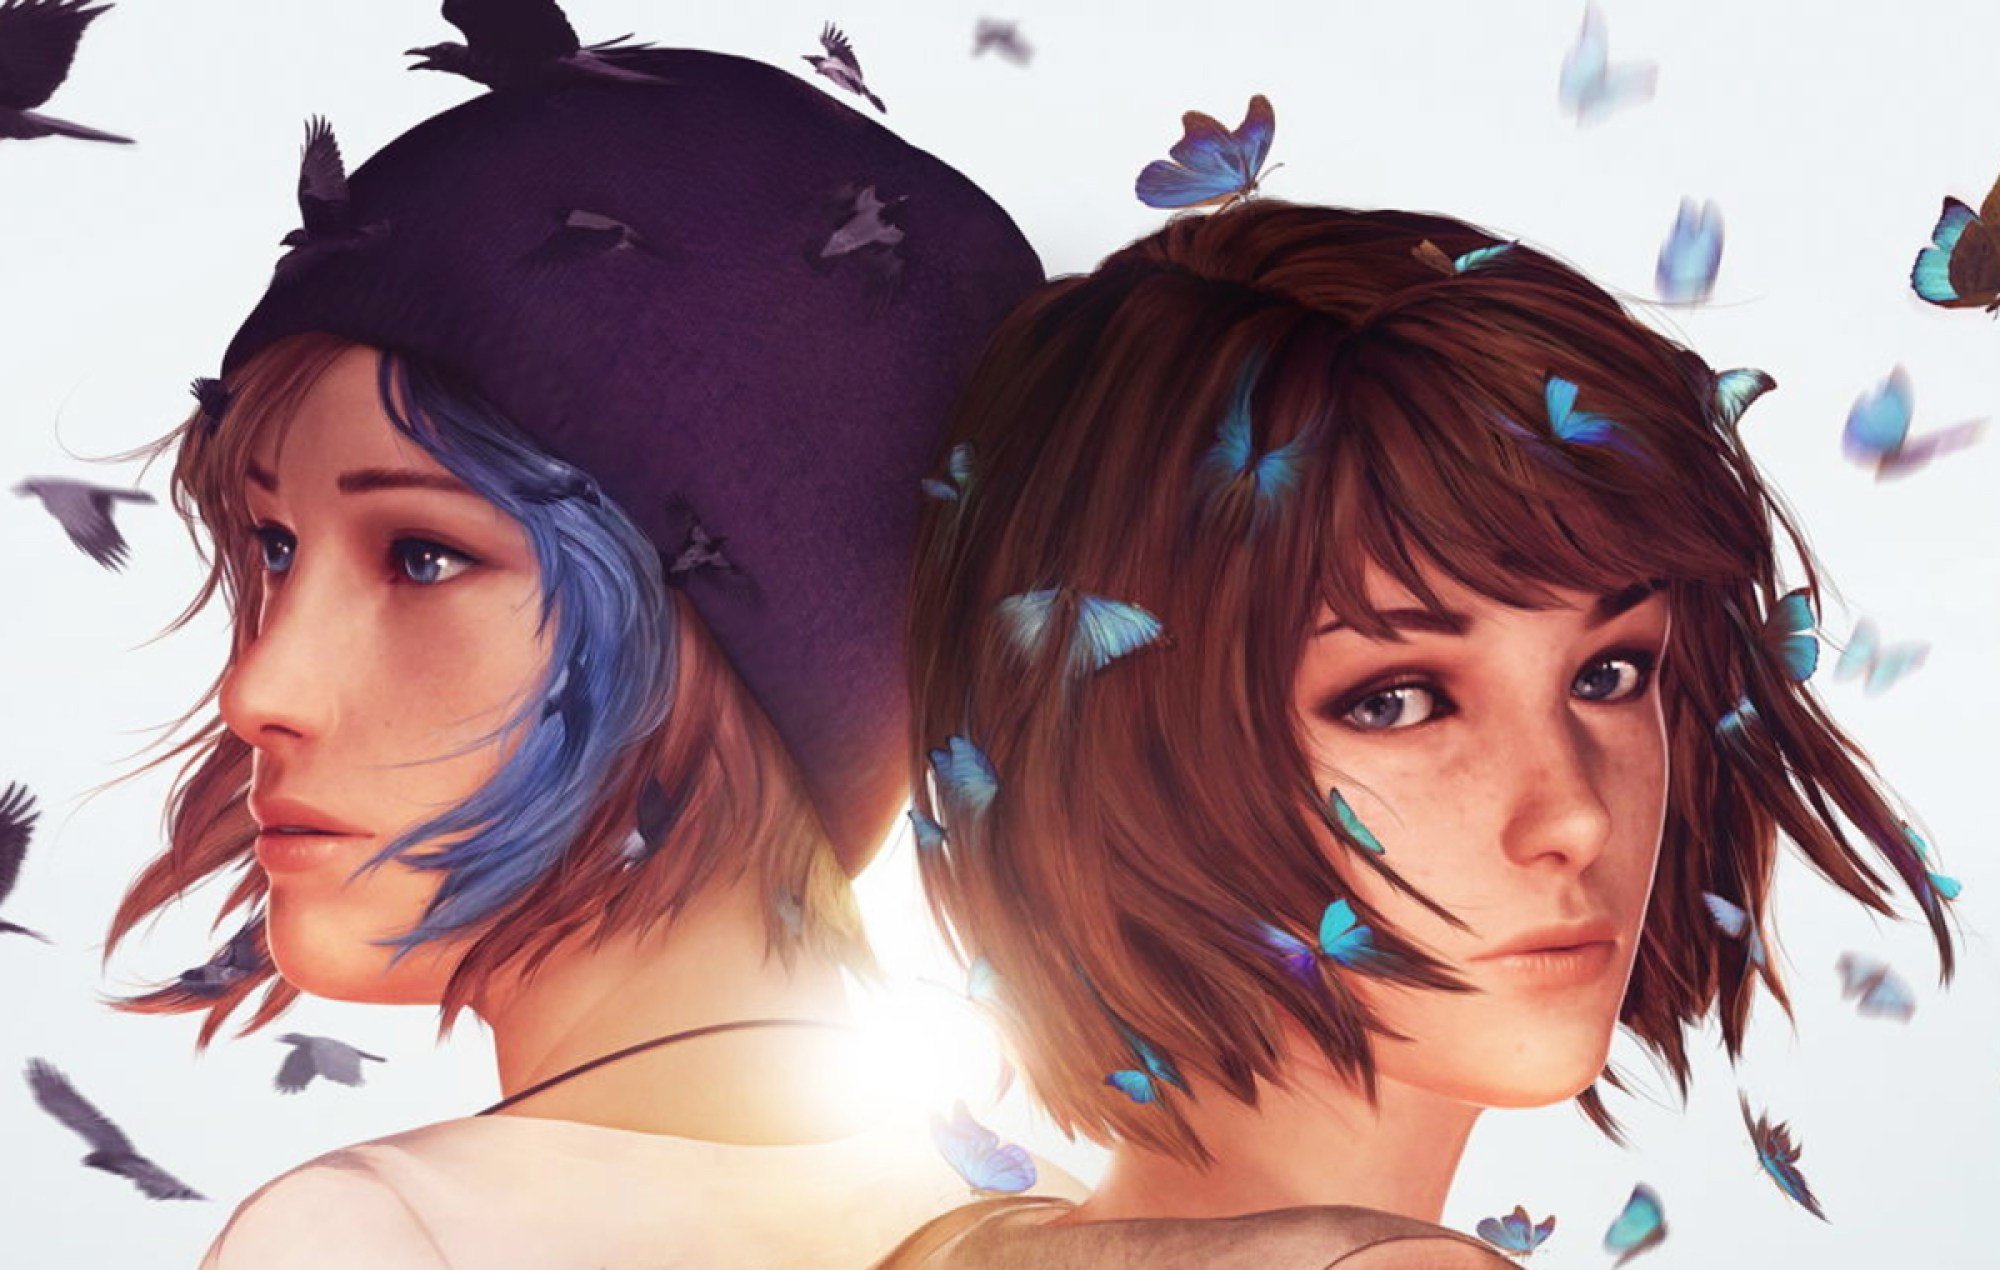 Art banner for LIS Remastered, featuring Chloe and Max. 